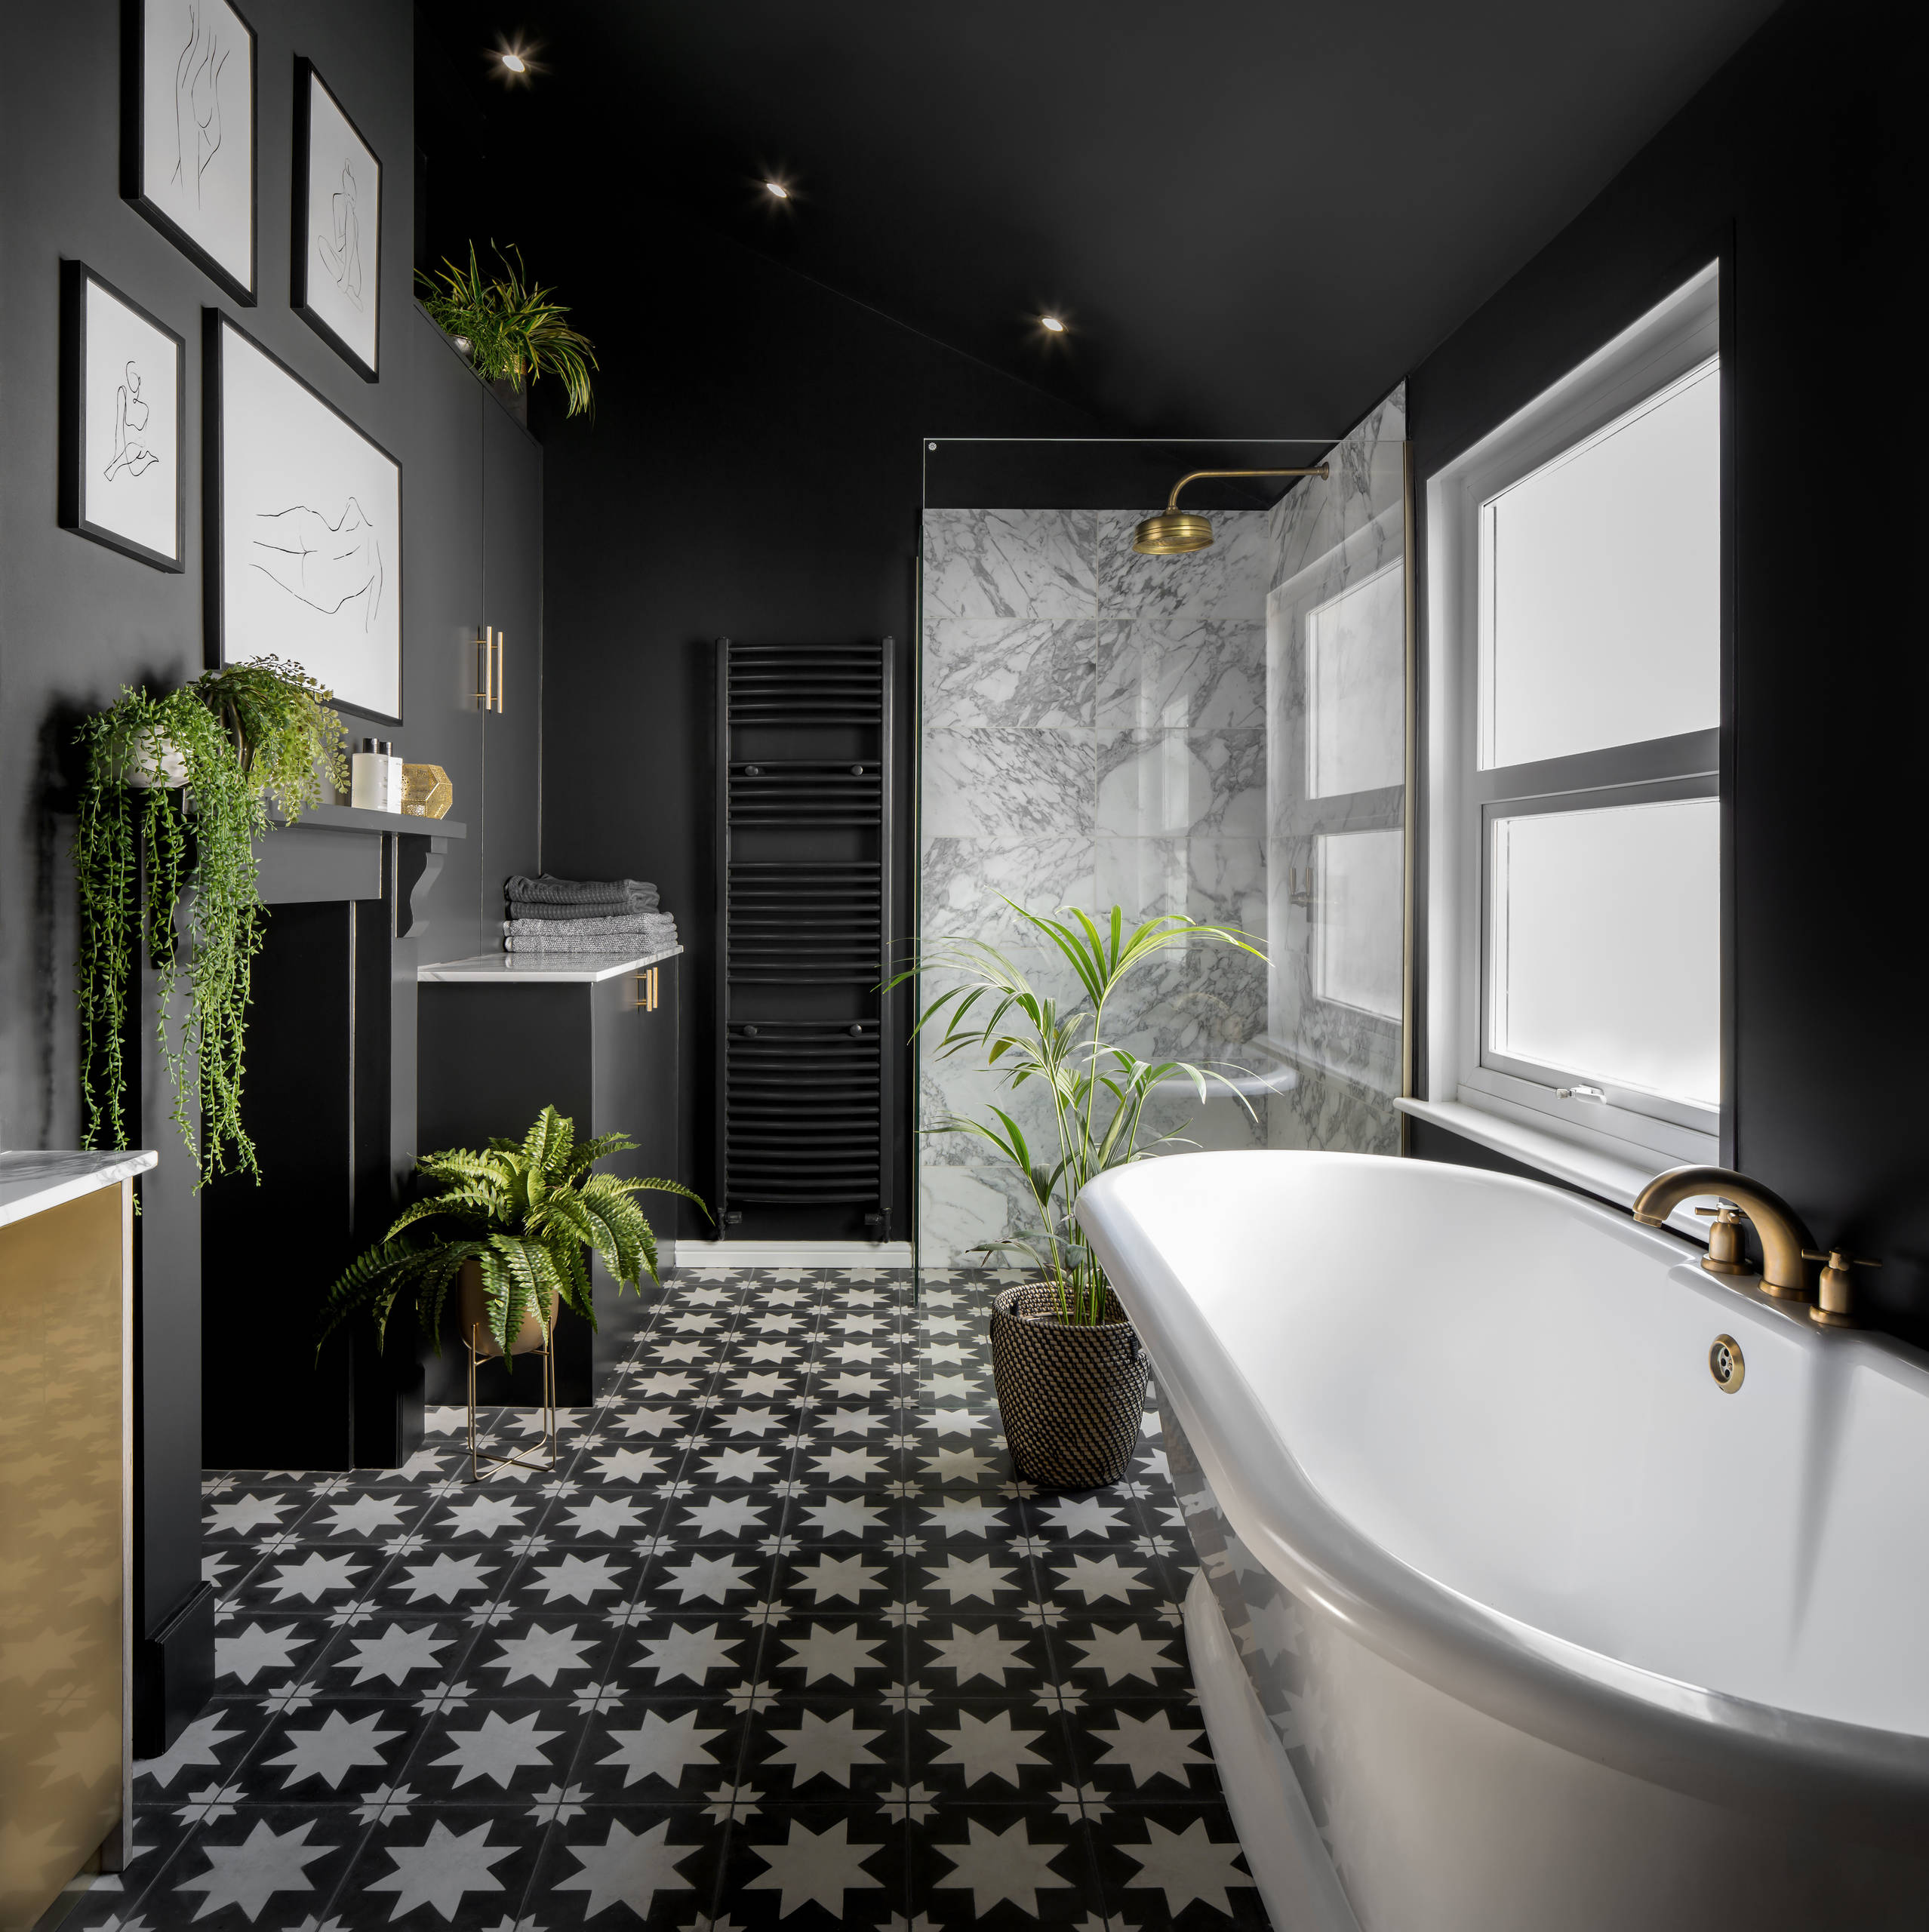 Cost Of Your Bathroom Renovation, How Much Does It Cost To Redo A Small Bathroom Uk